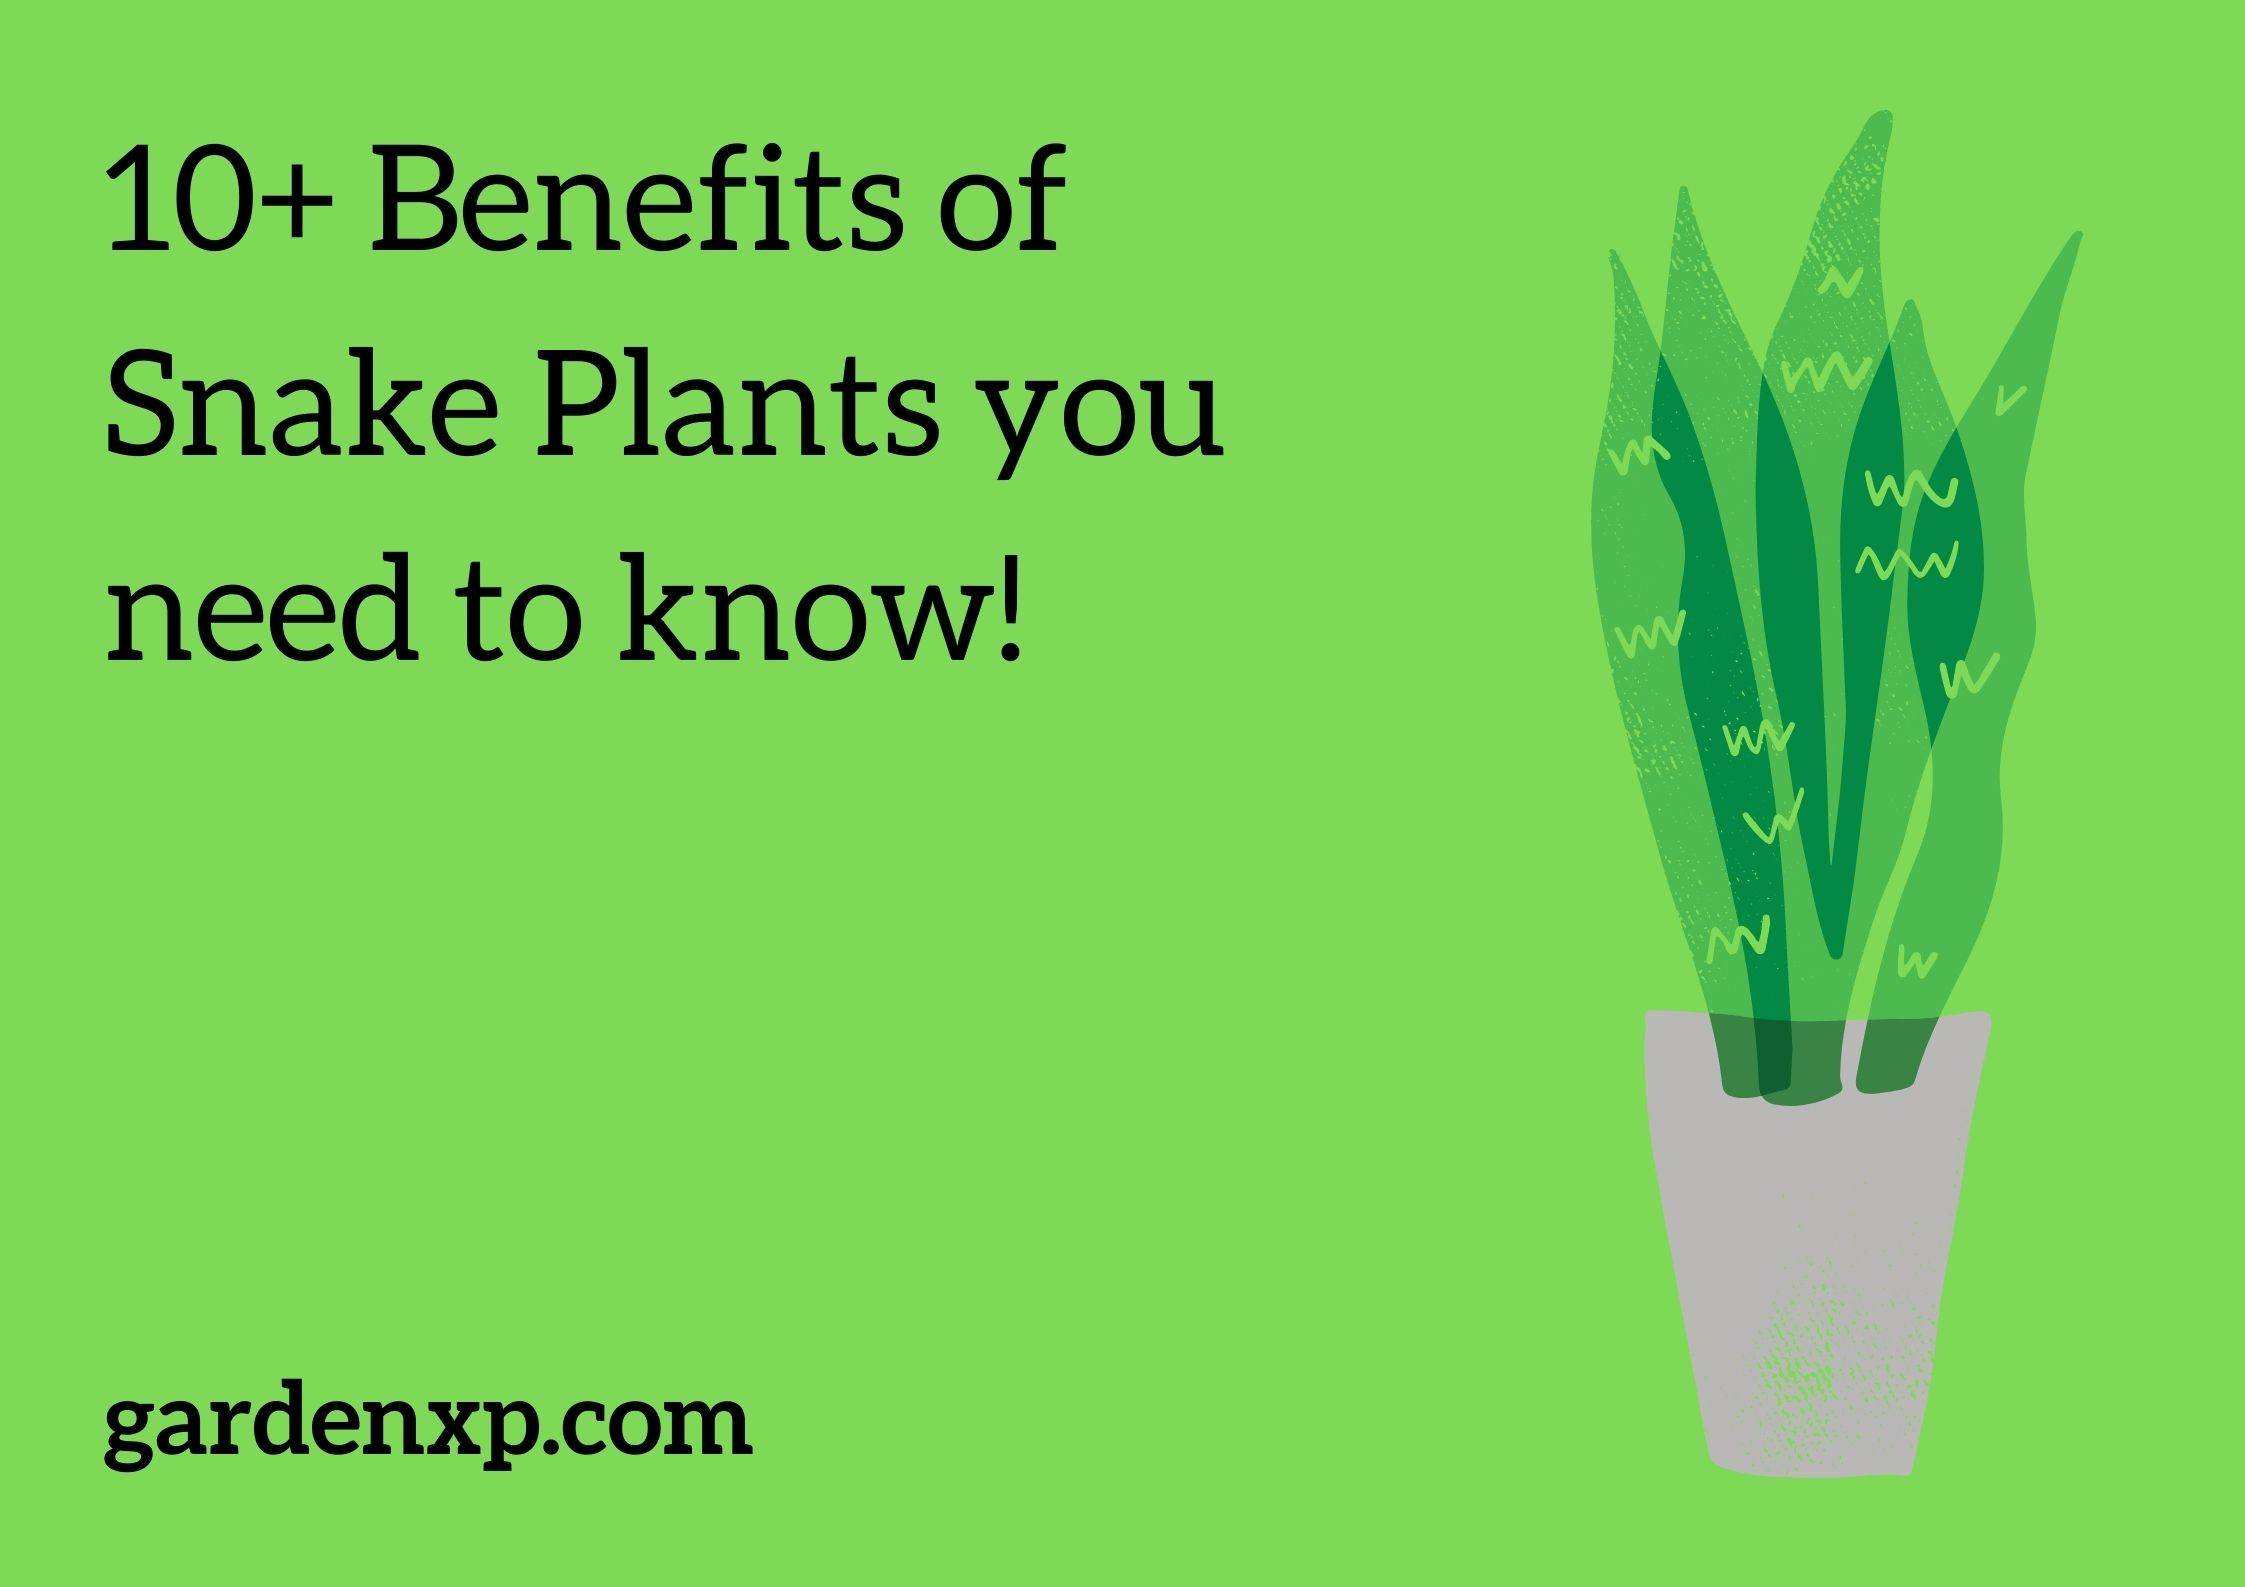 10+ Benefits of Snake Plants you need to know!